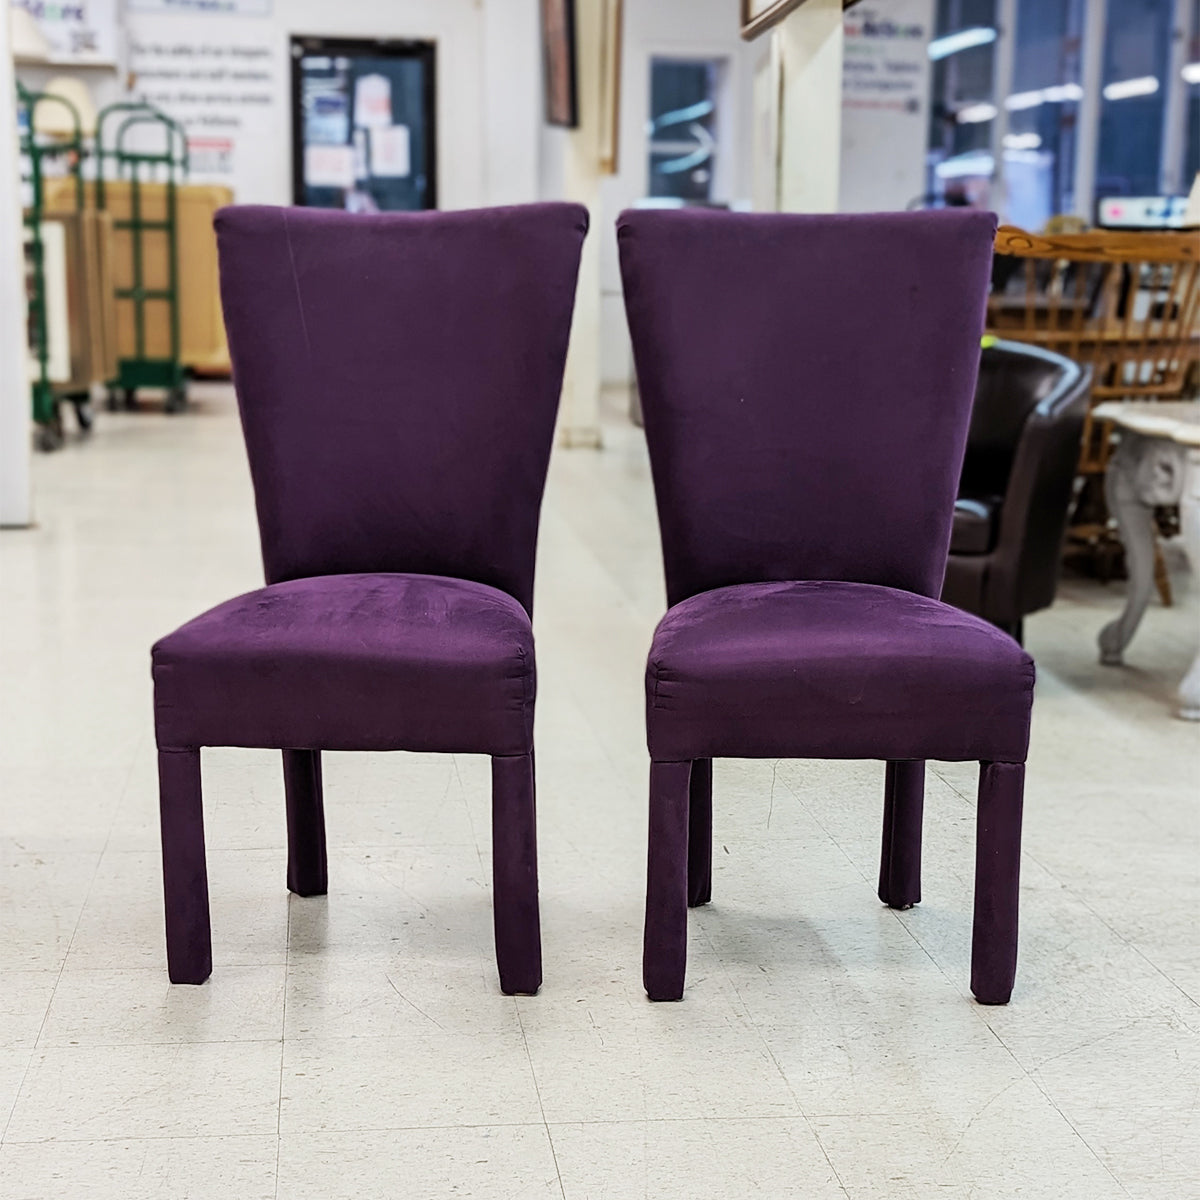 Modern Purple Plush Dining Chairs (Sold Separately) - Habroc - Online ReStore